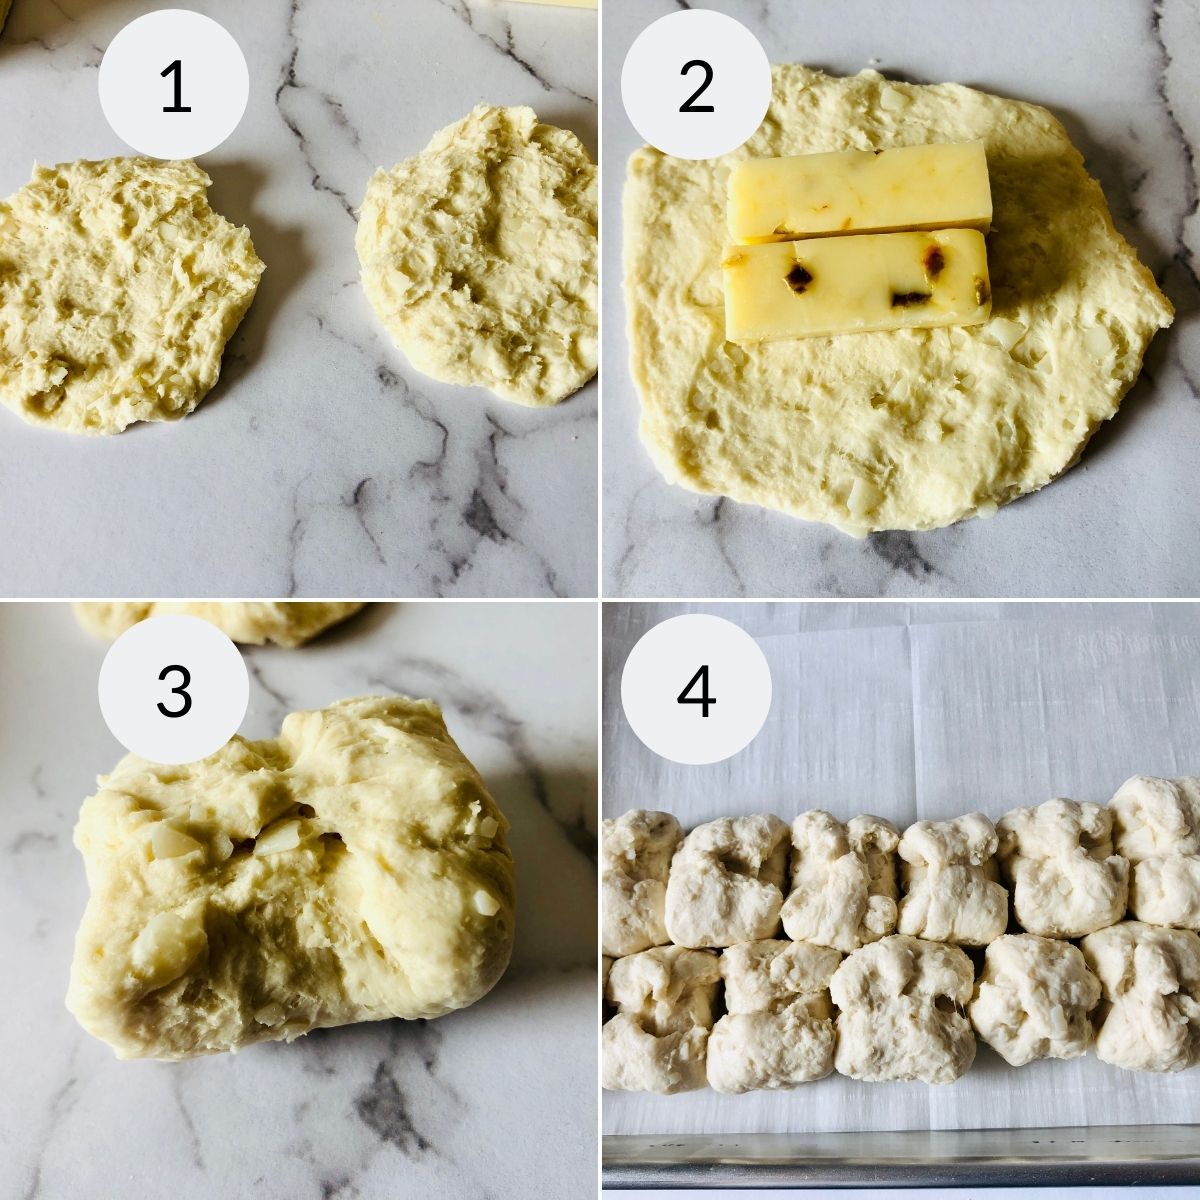 Arranging the dough around the cheese.